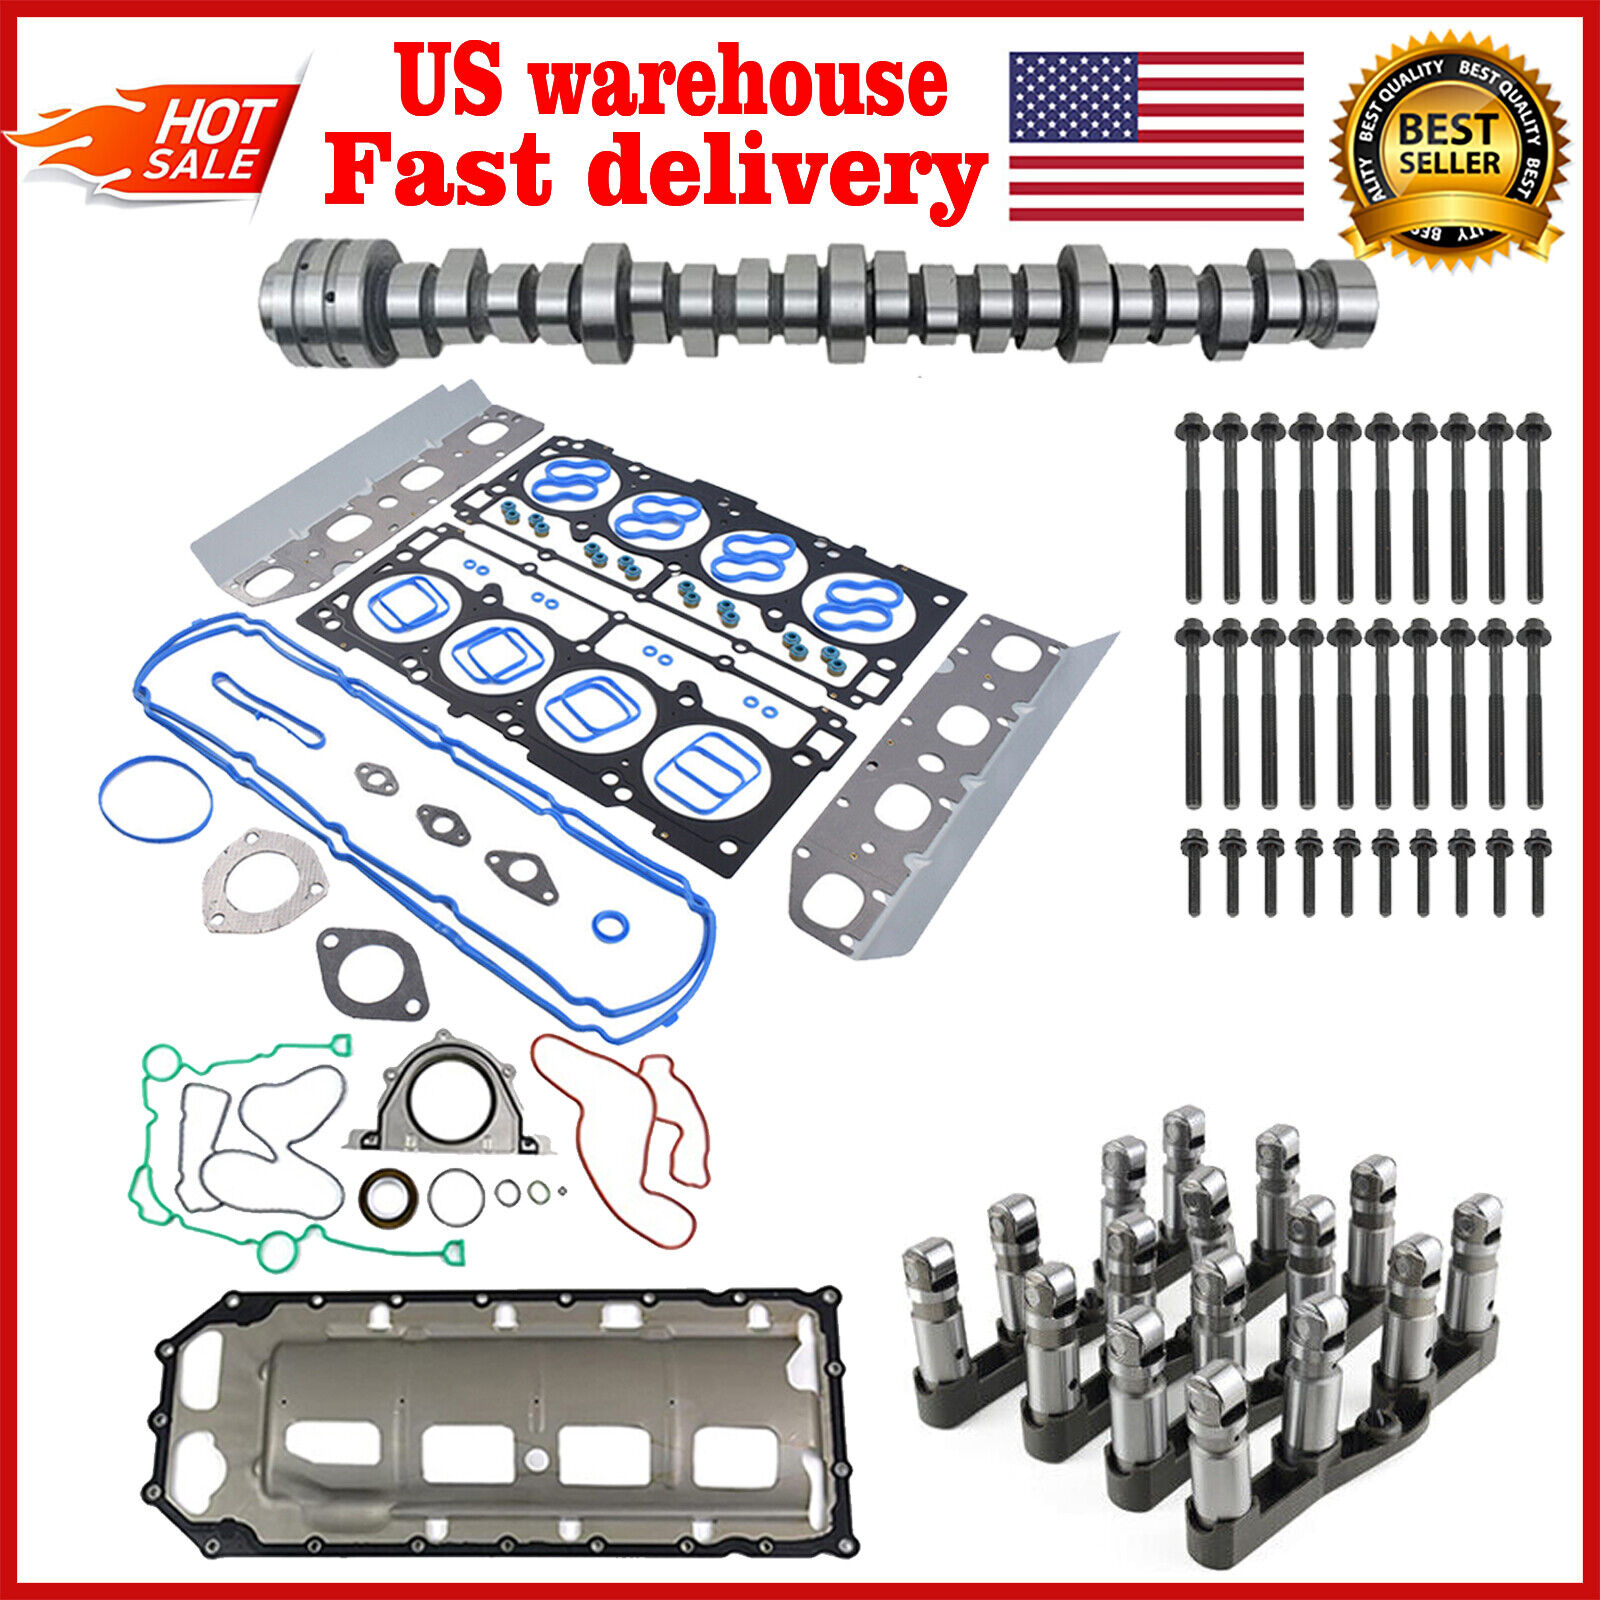 FIT 09-19 Ram 1500 5.7L Hemi V8 Replacement MDS Lifters & Gaskets & Camshaft Kit